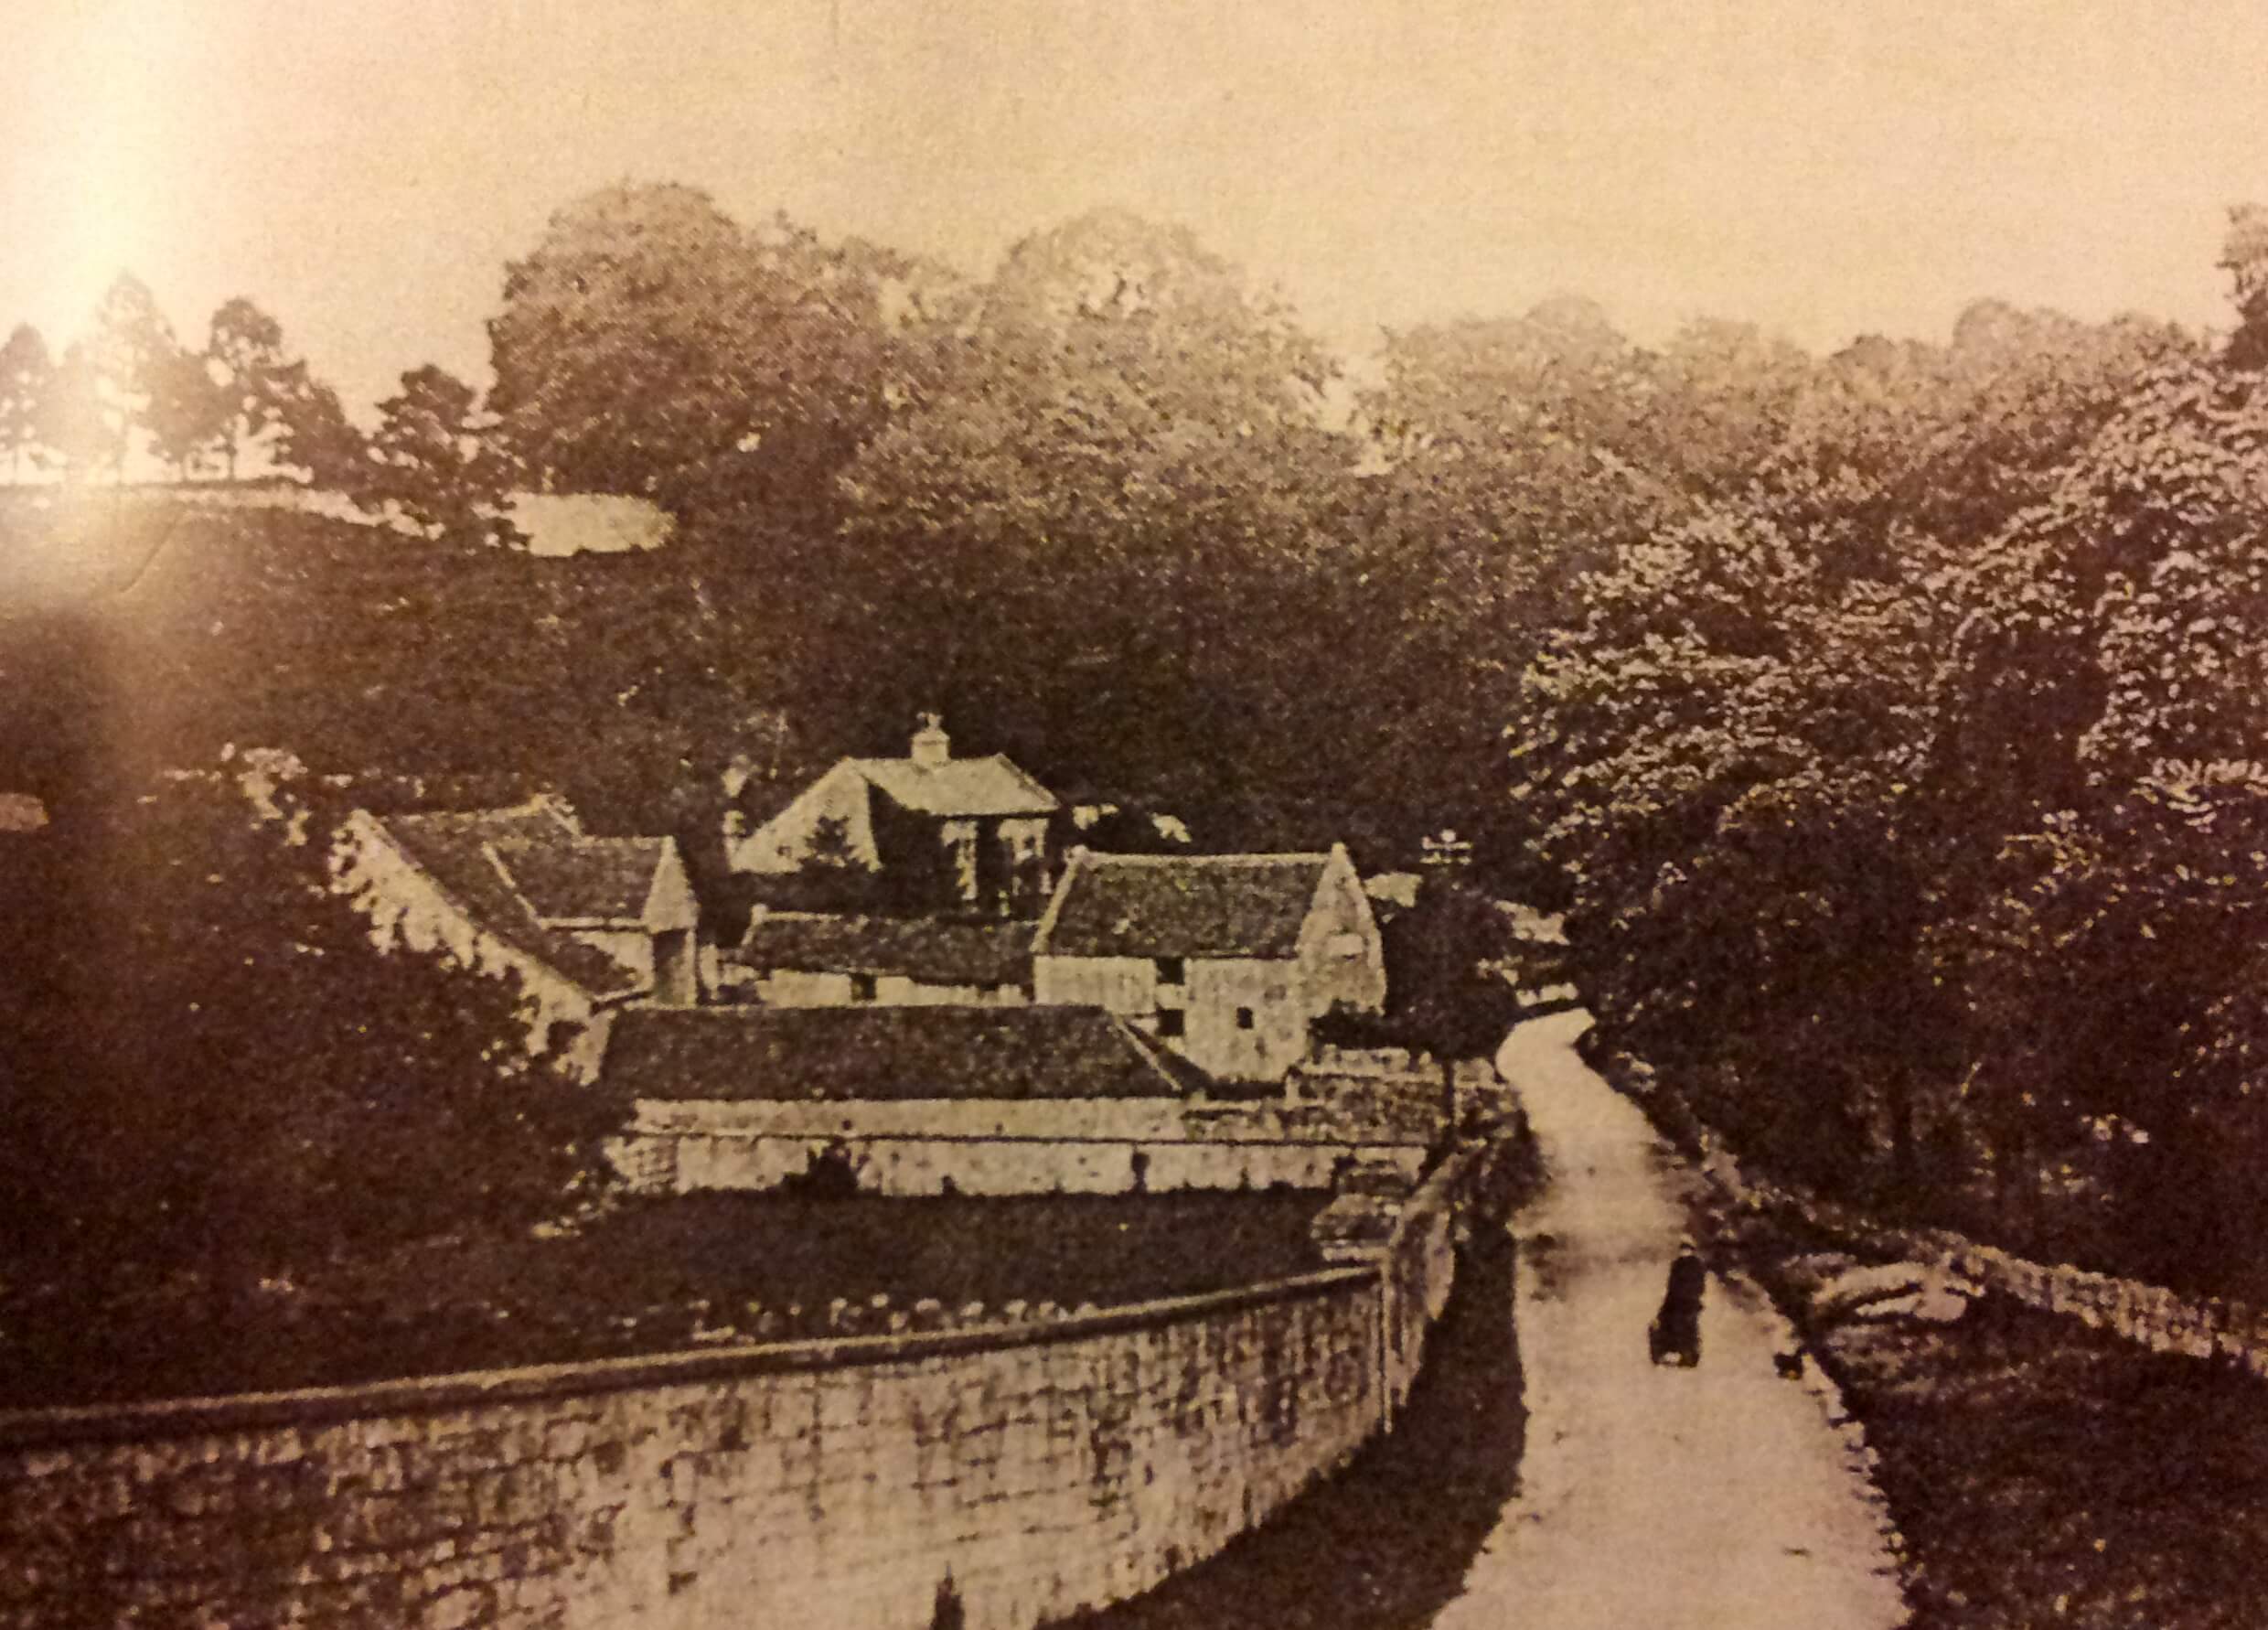 Summer Lane early 1900s